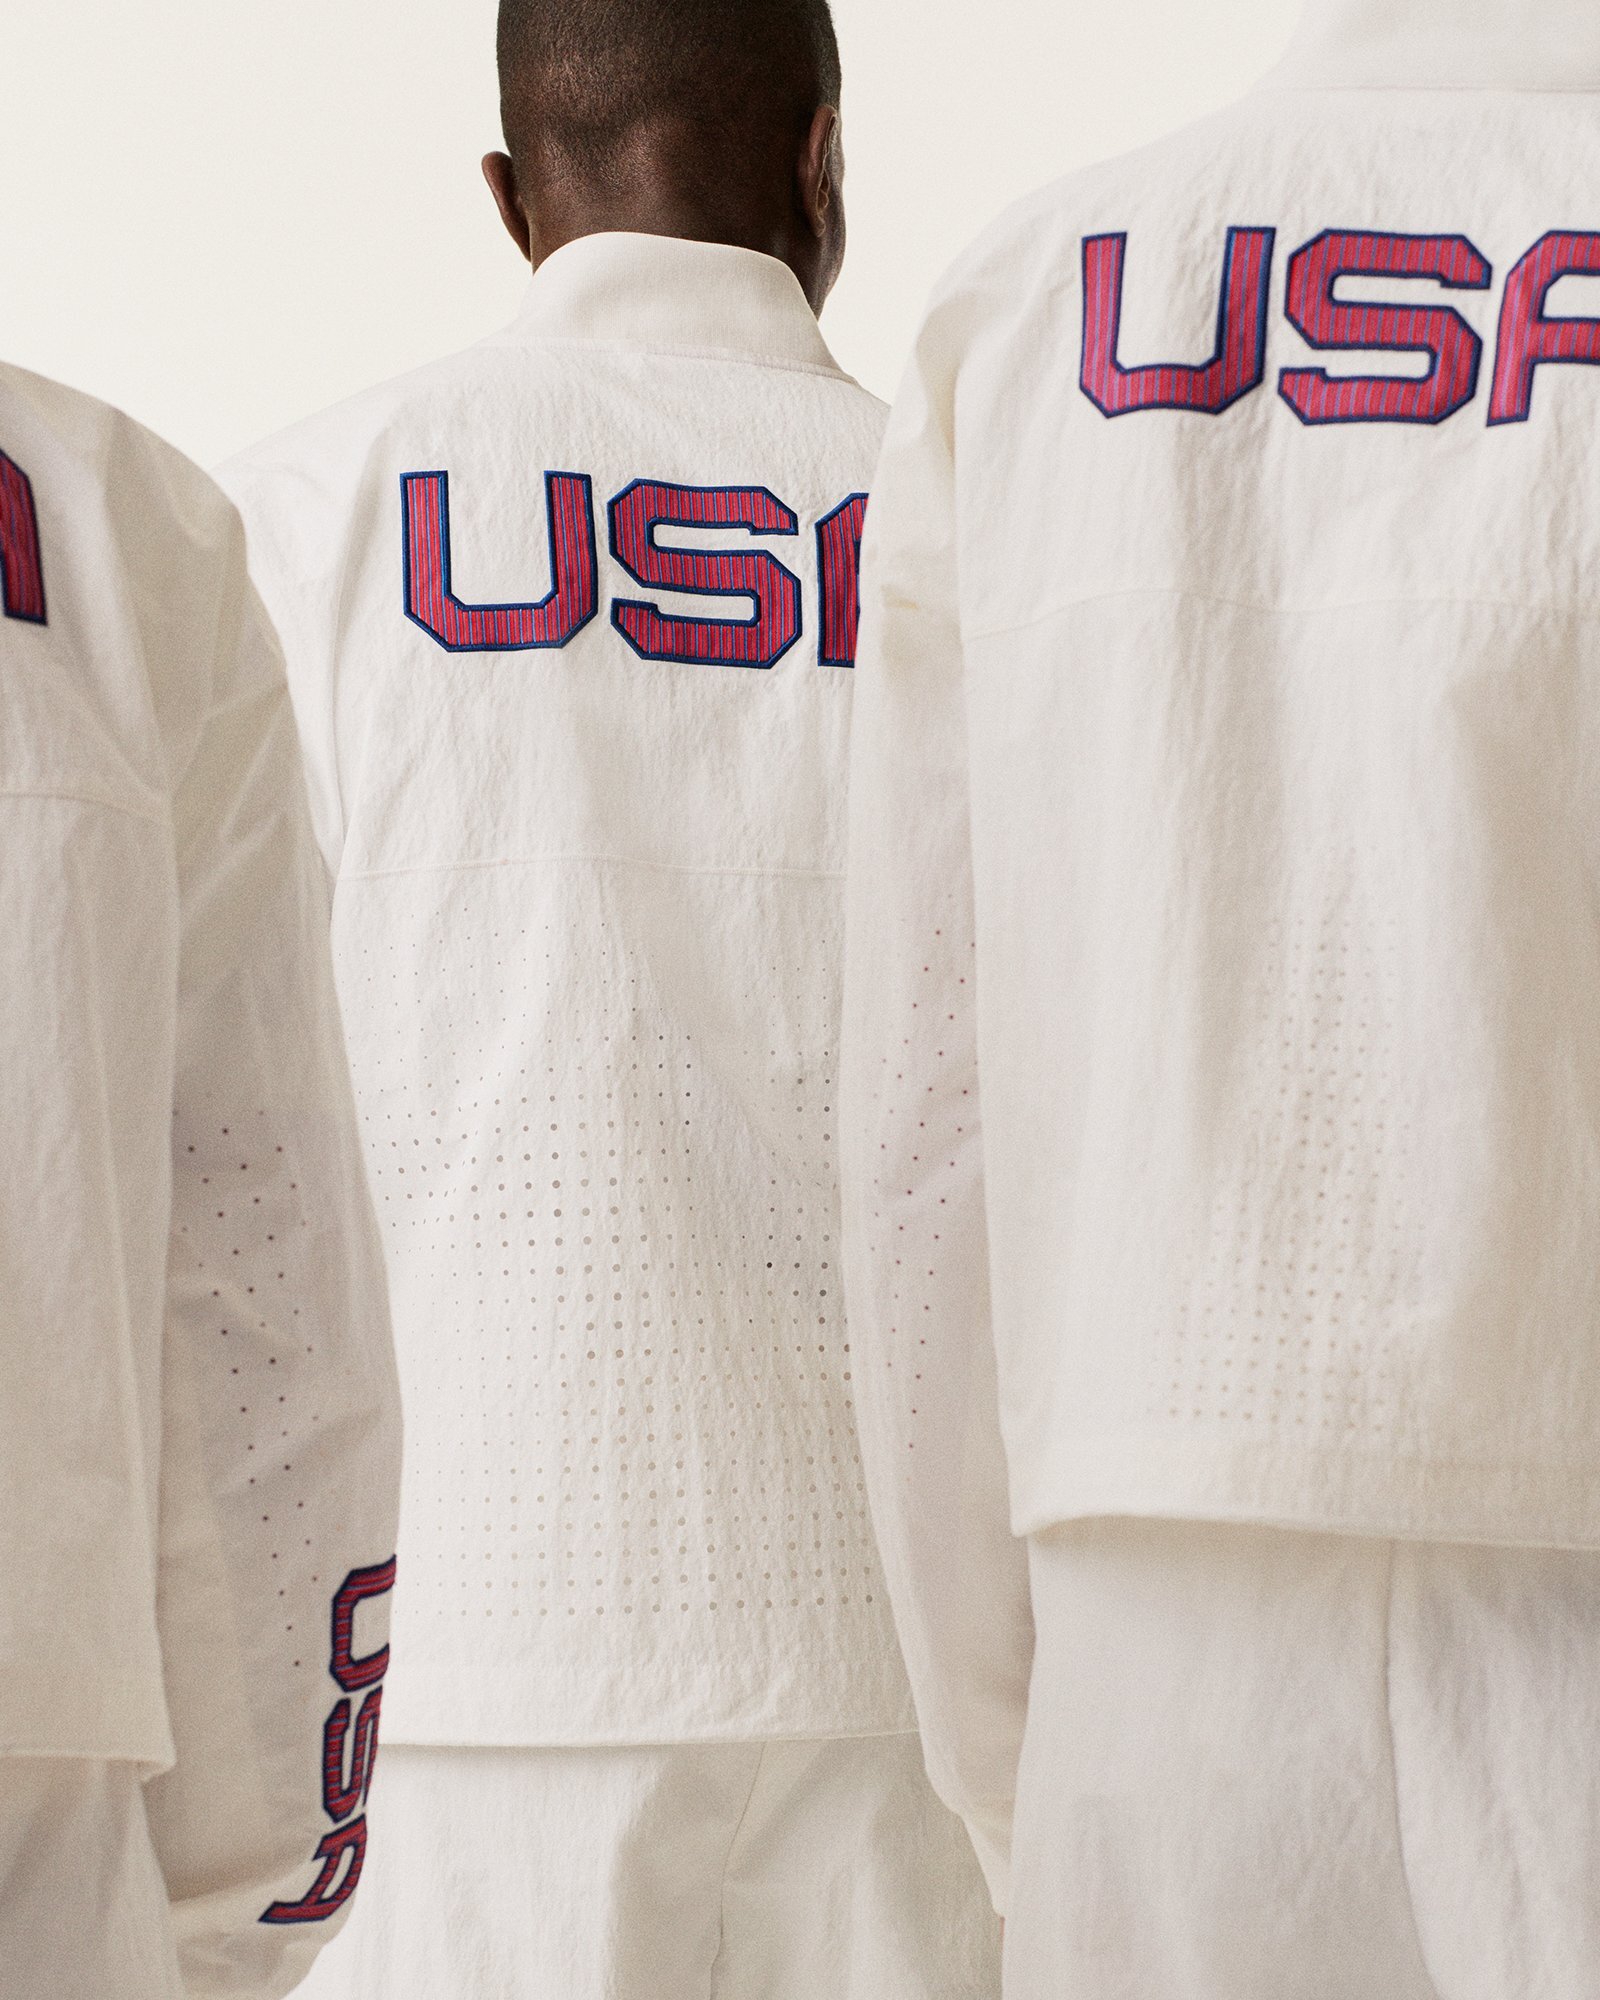 Pass or Fail: Team USA's home and away Olympic jerseys